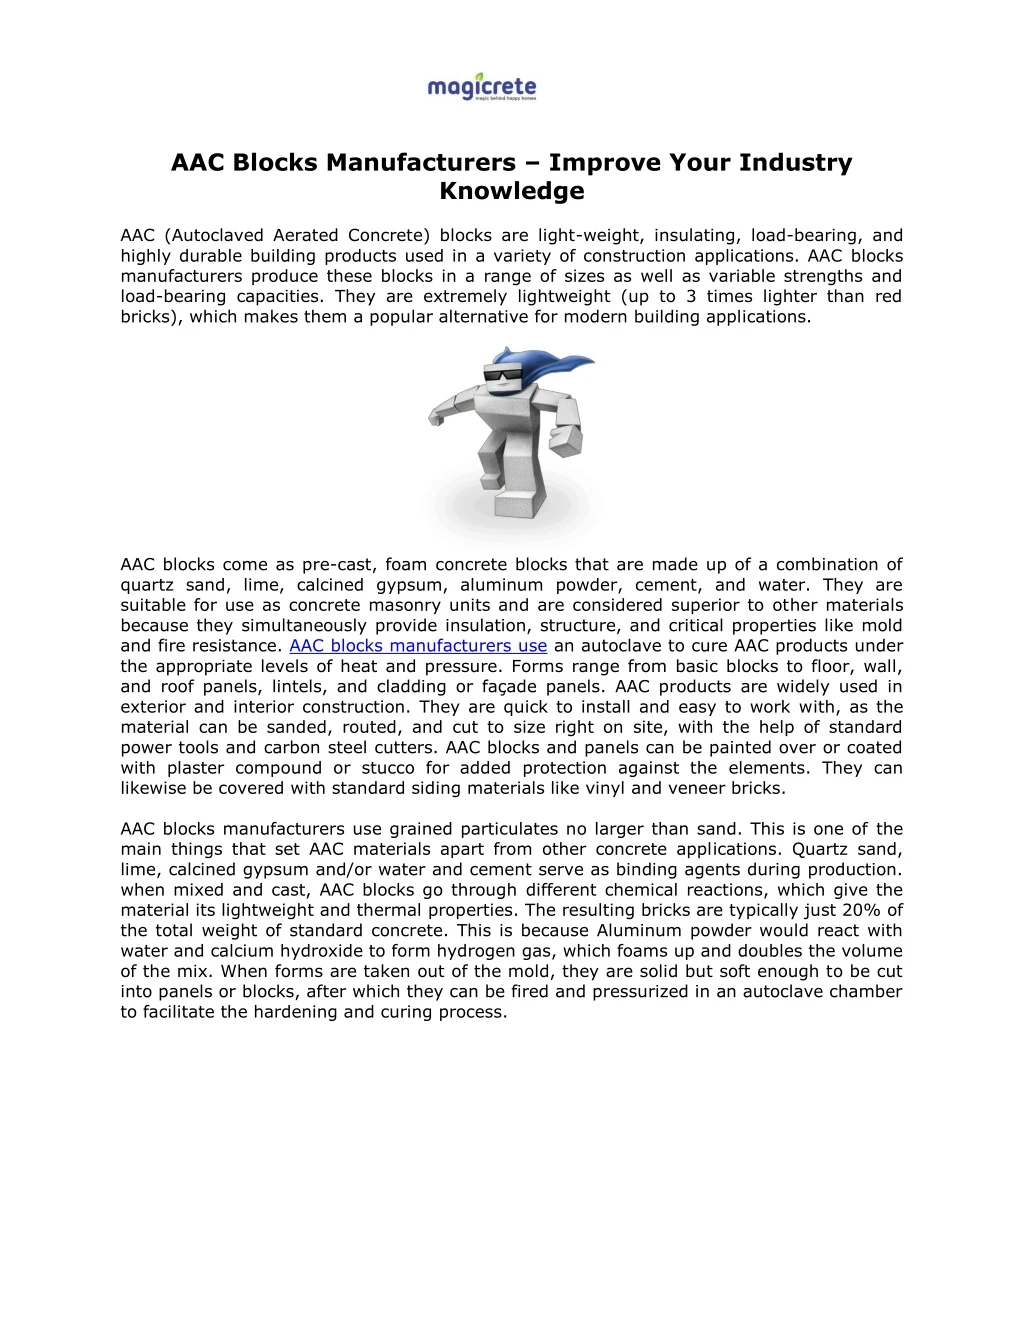 aac blocks manufacturers improve your industry